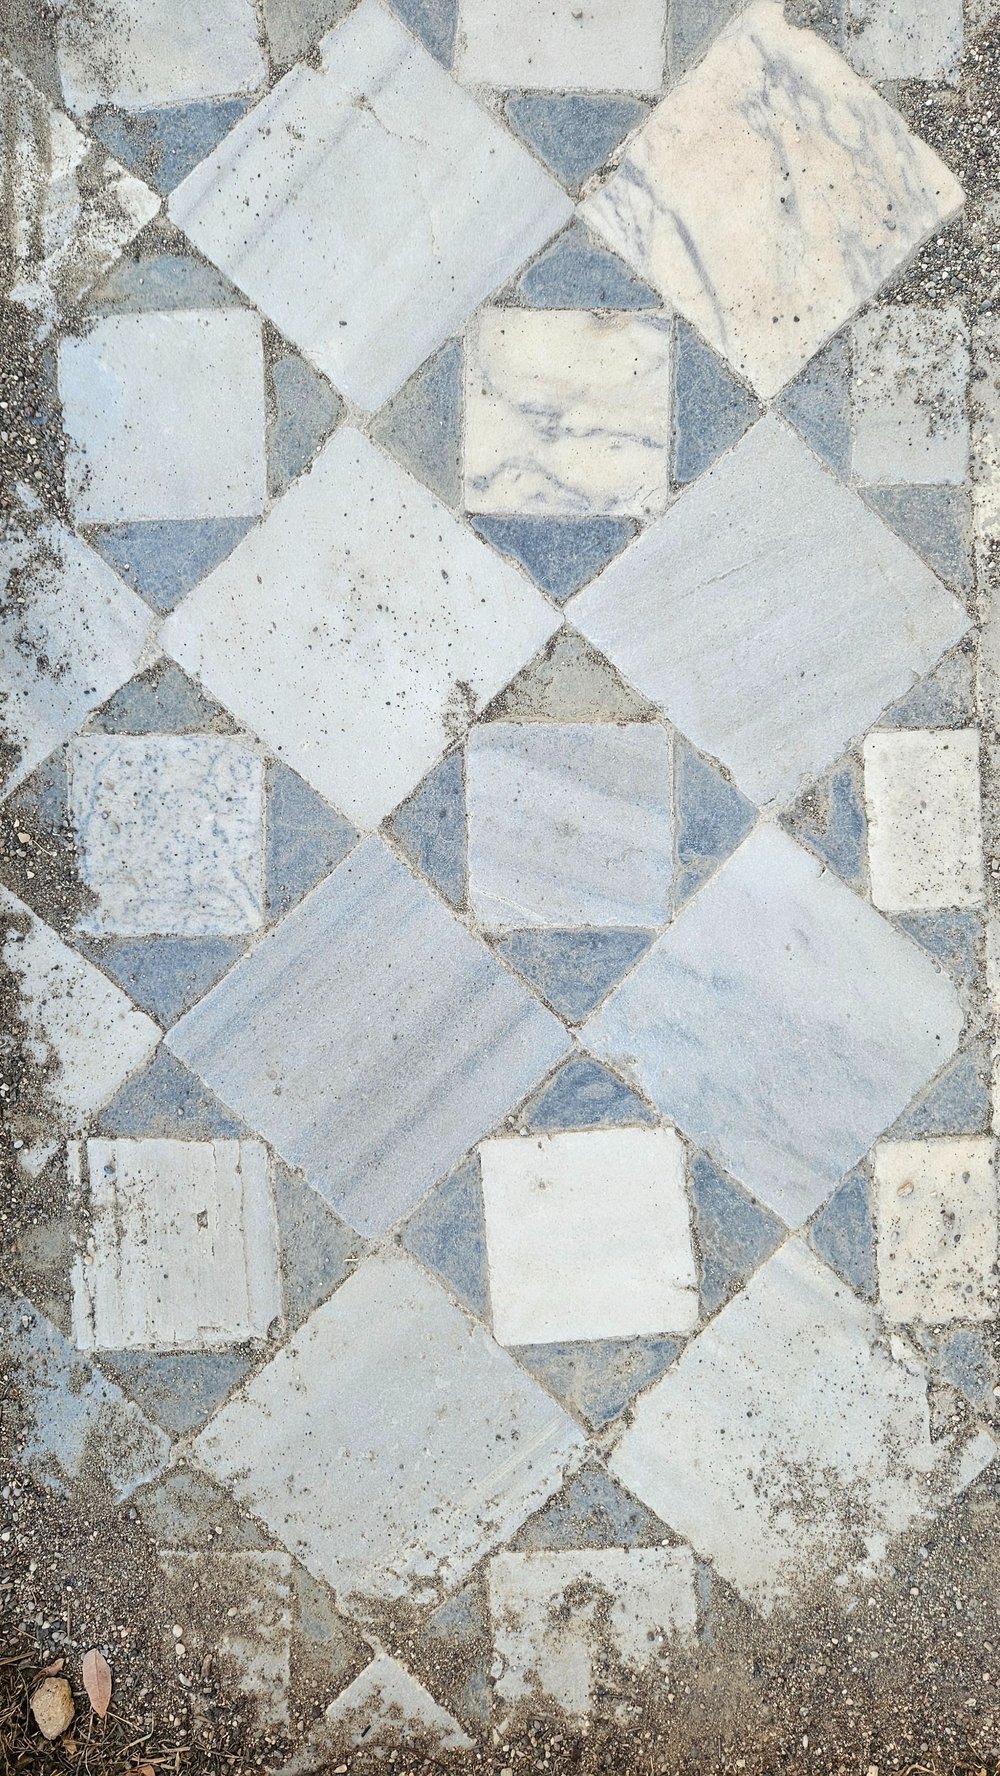 Opus Sectile Thermen Perge